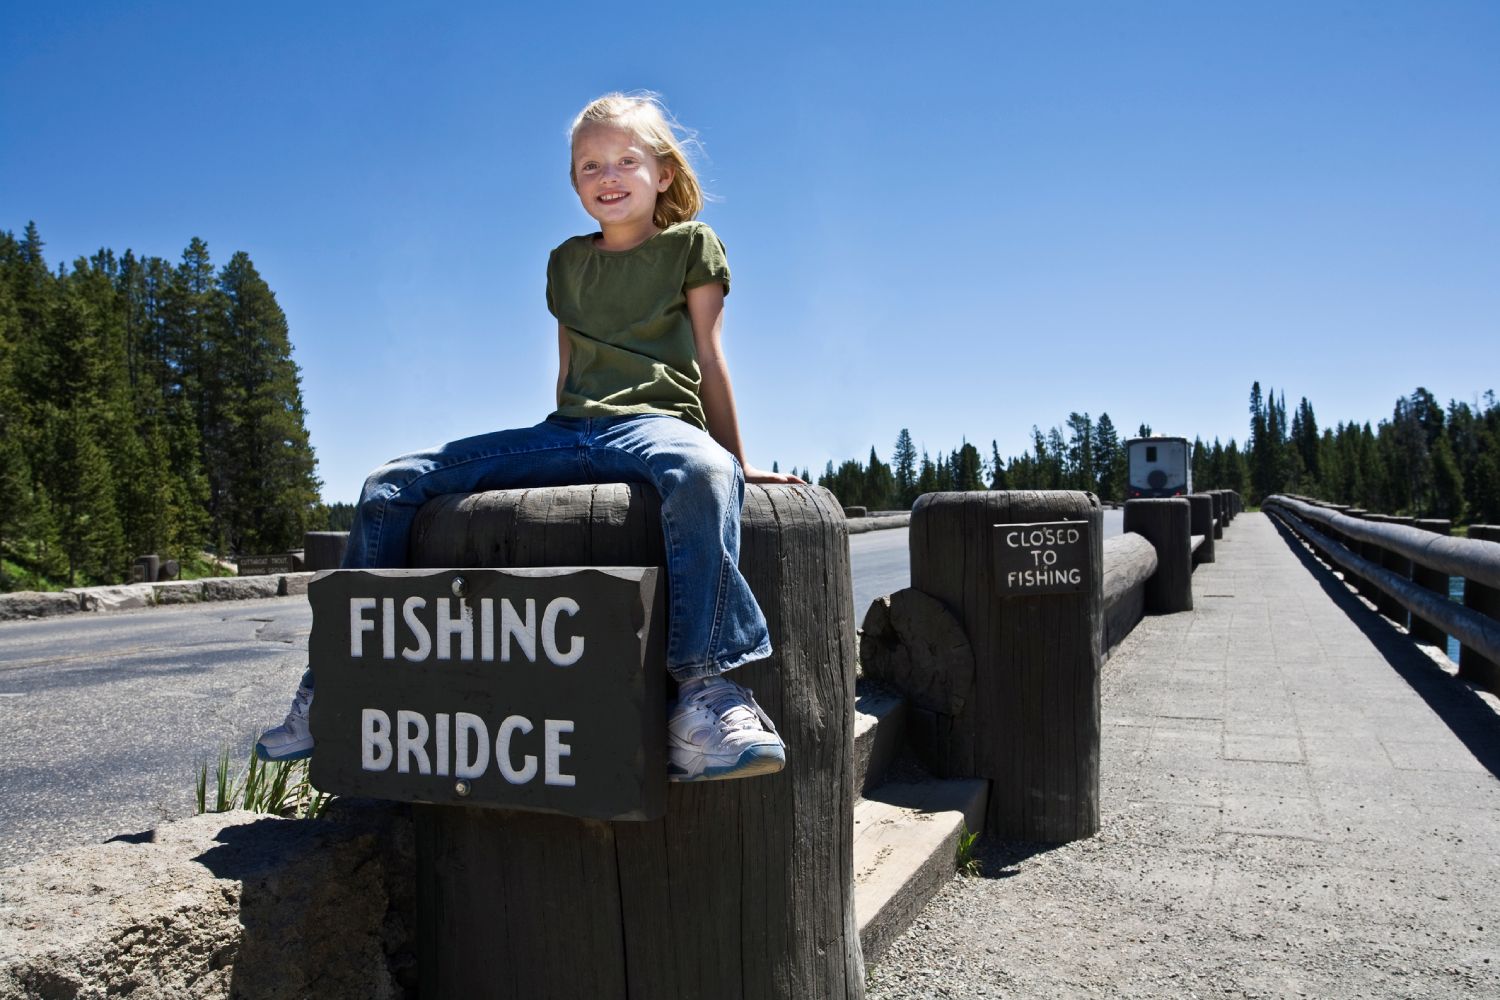 A child sits on the Fishing Bridge in Yellowstone National Park